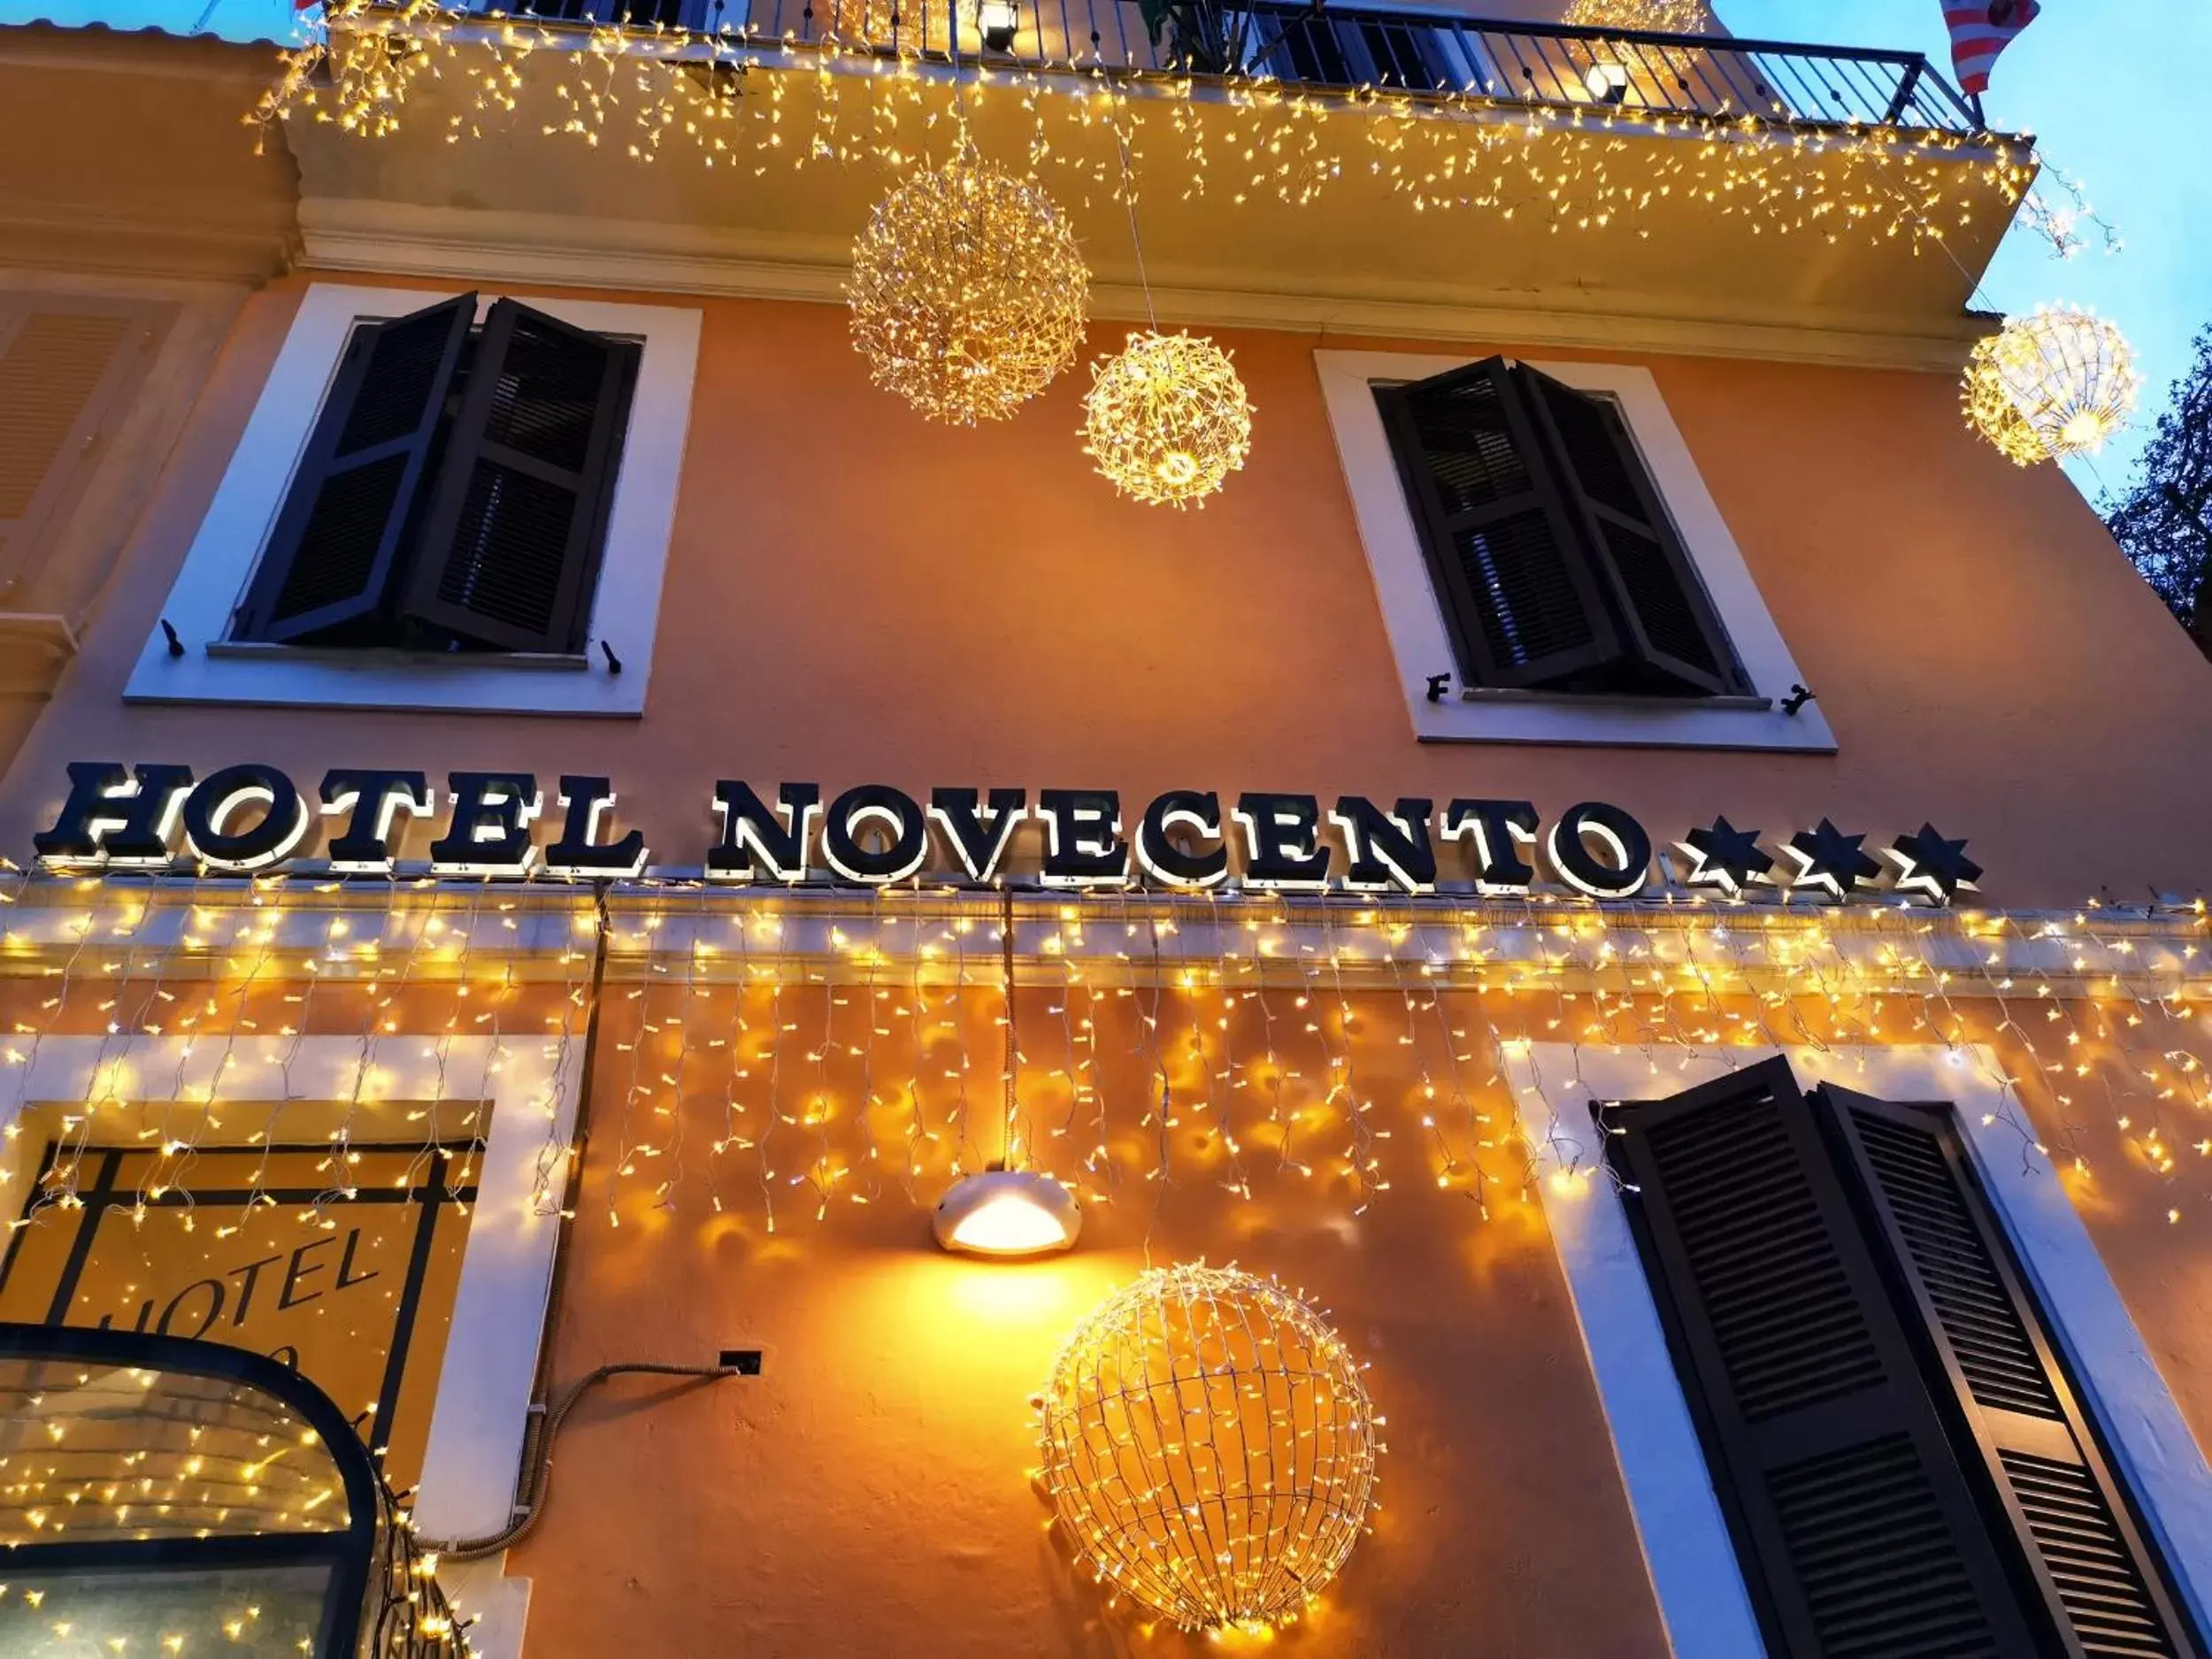 Property logo or sign in Hotel Novecento